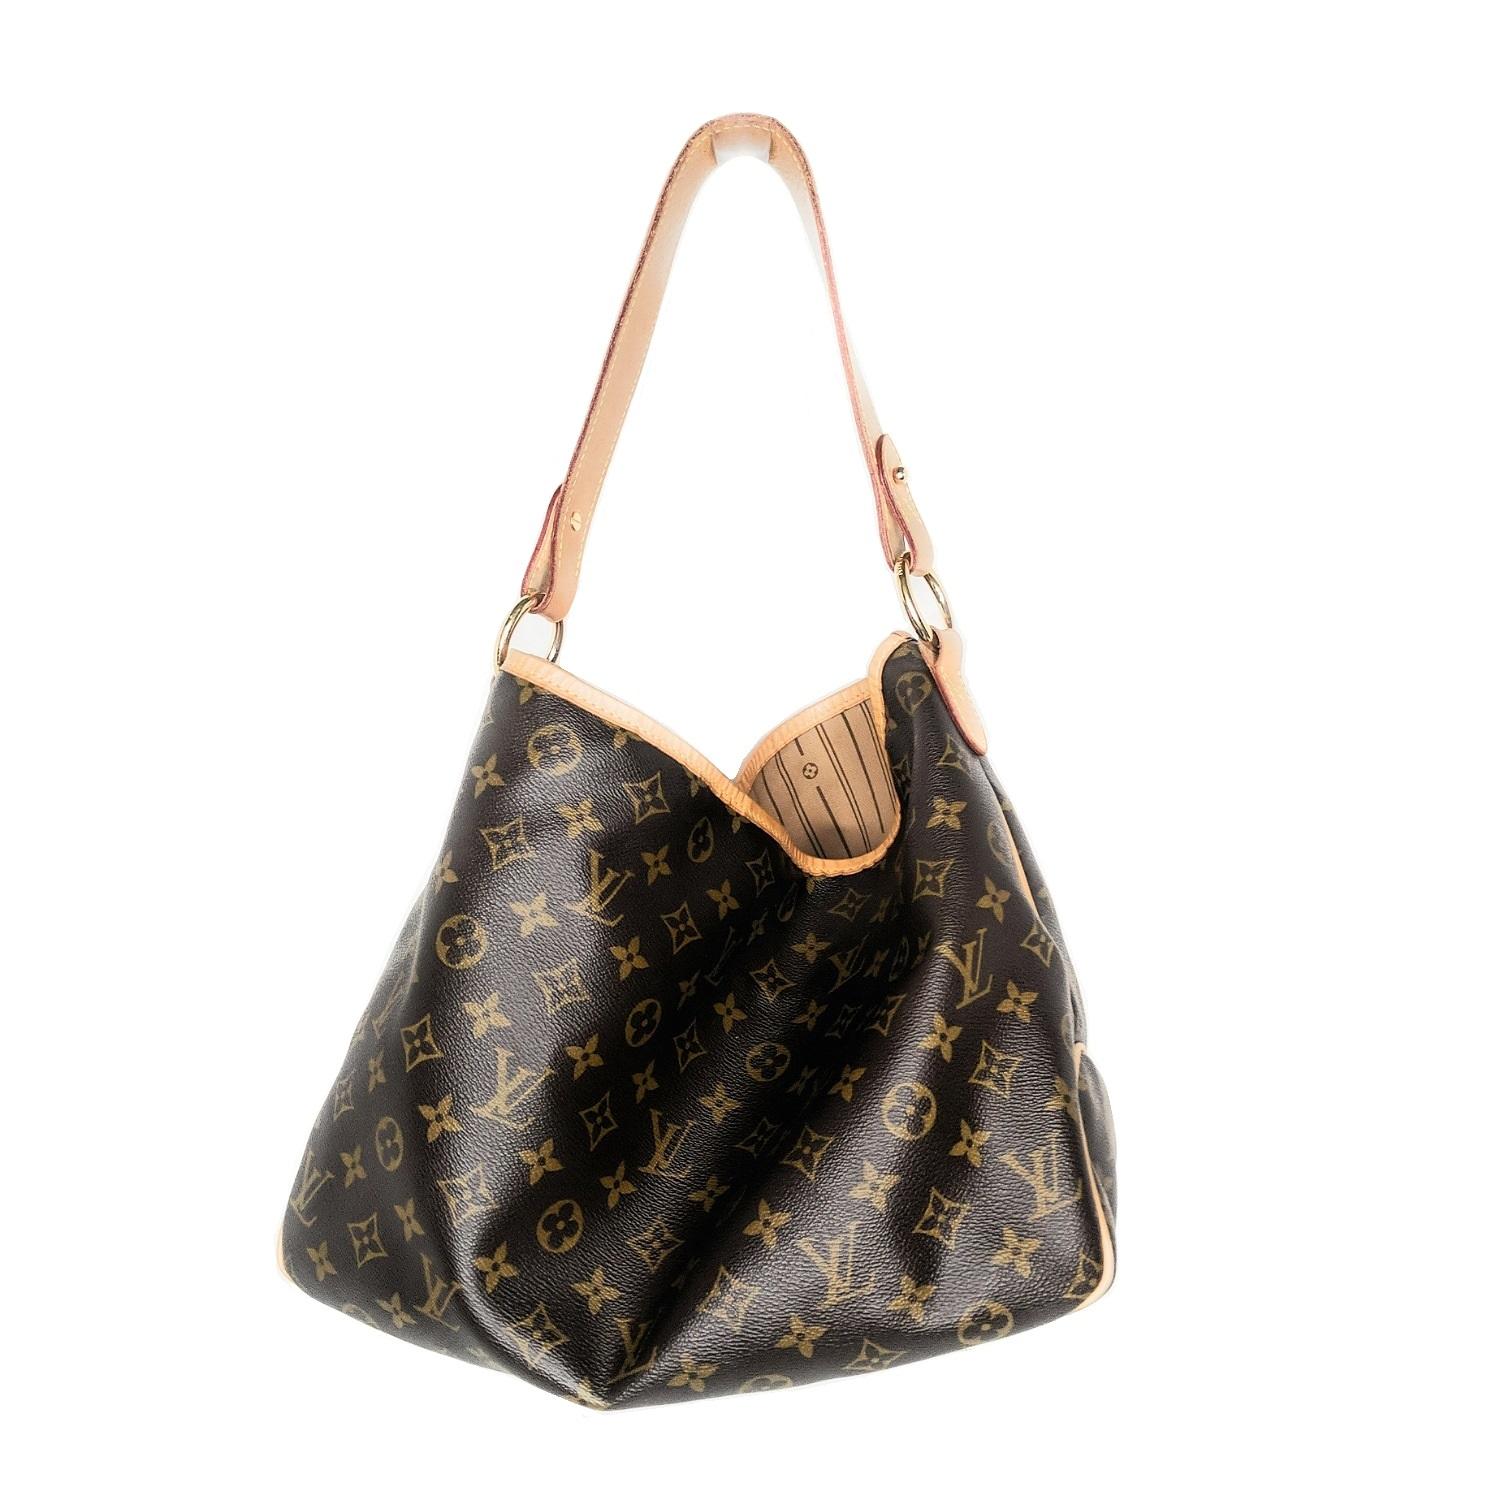 Brown and tan monogram coated canvas Louis Vuitton Delightful with brass hardware, tan Vachetta leather trim, single flat shoulder strap, brown and tan striped canvas lining, single zip pocket at interior wall and clasp closure at top. Retail price